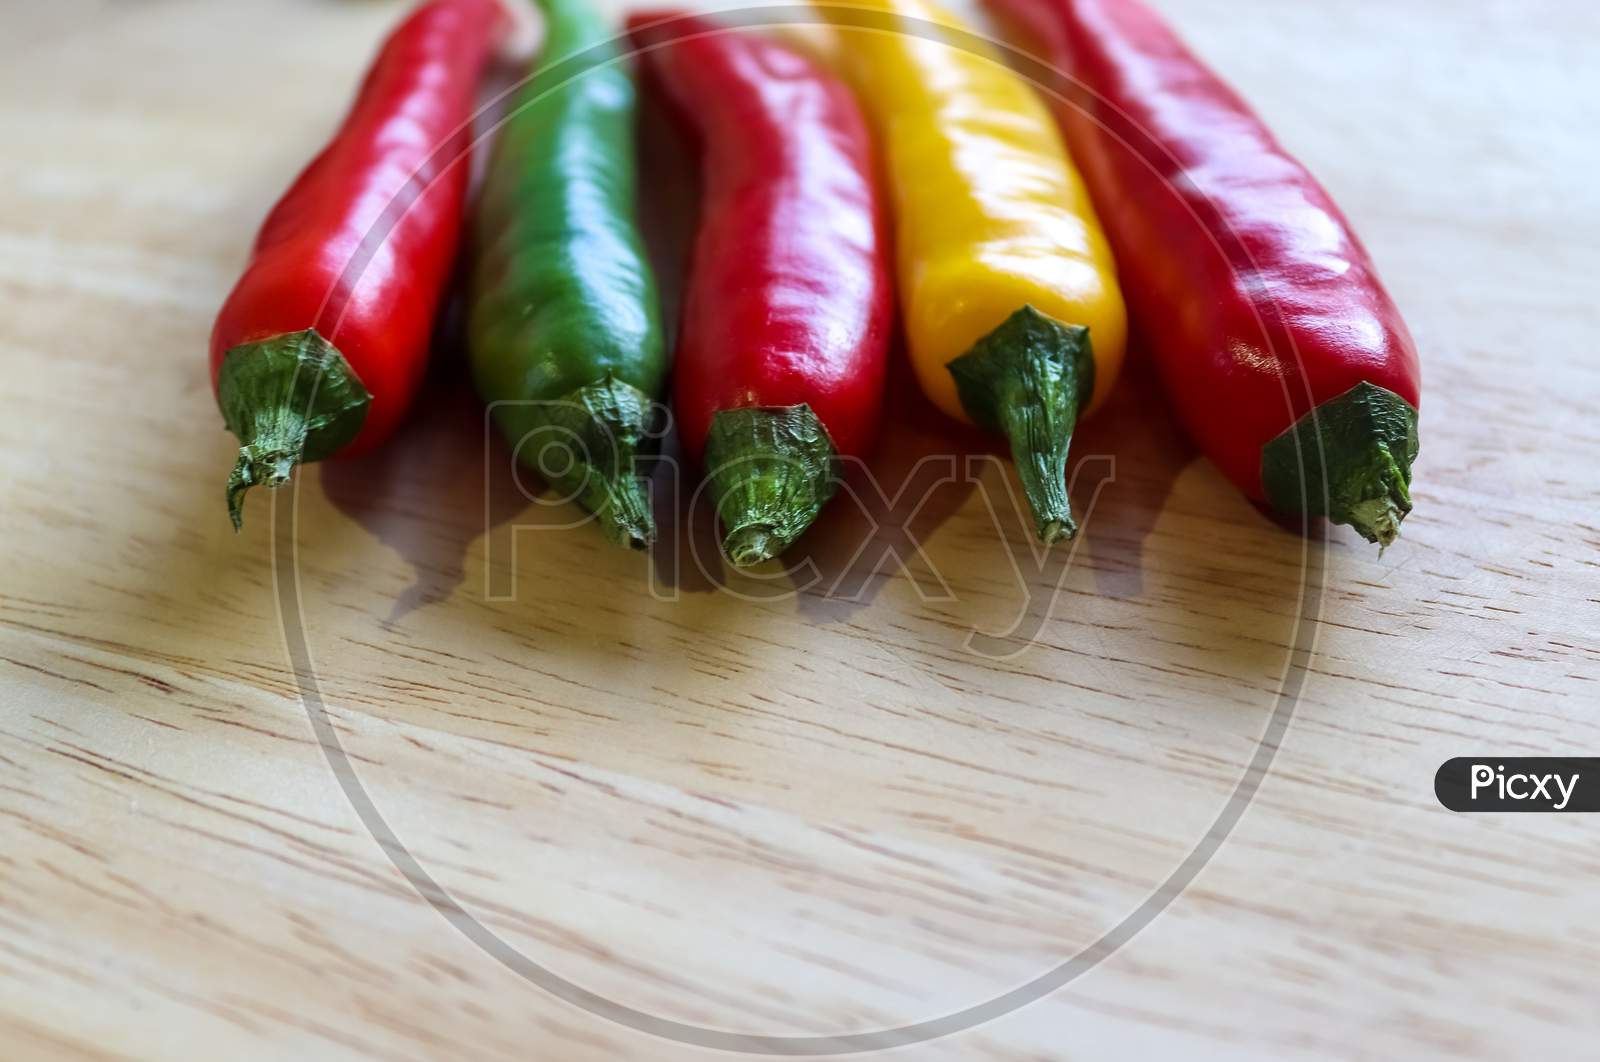 Top And Perspective View Of Chili Pepper And Steel Knife On A Wooden Cutting Board With An Isolated Background